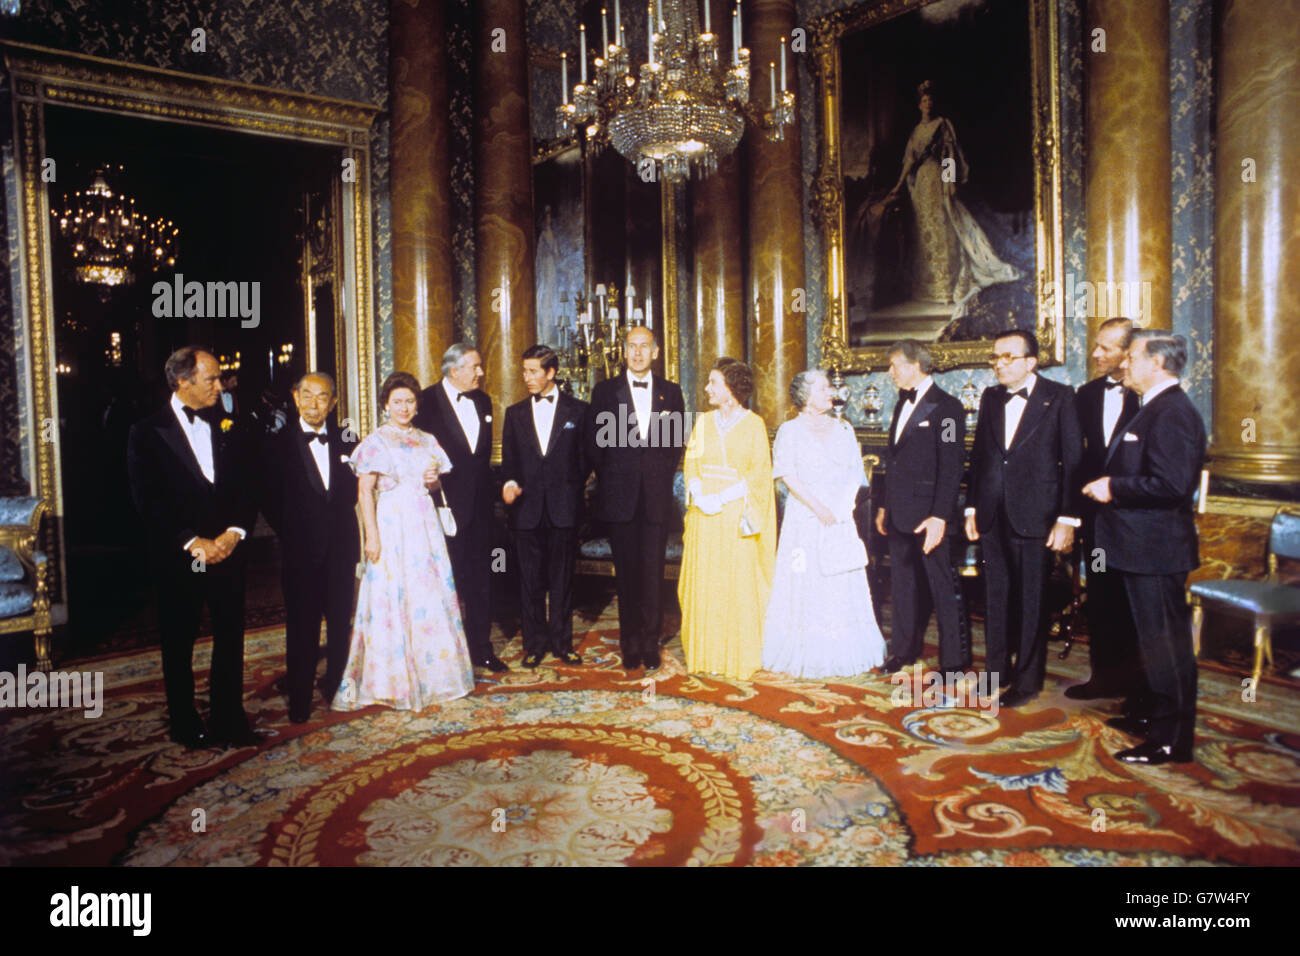 Royalty - Queen with Seven World Leaders - Blue Drawing Room at Buckingham Palace Stock Photo